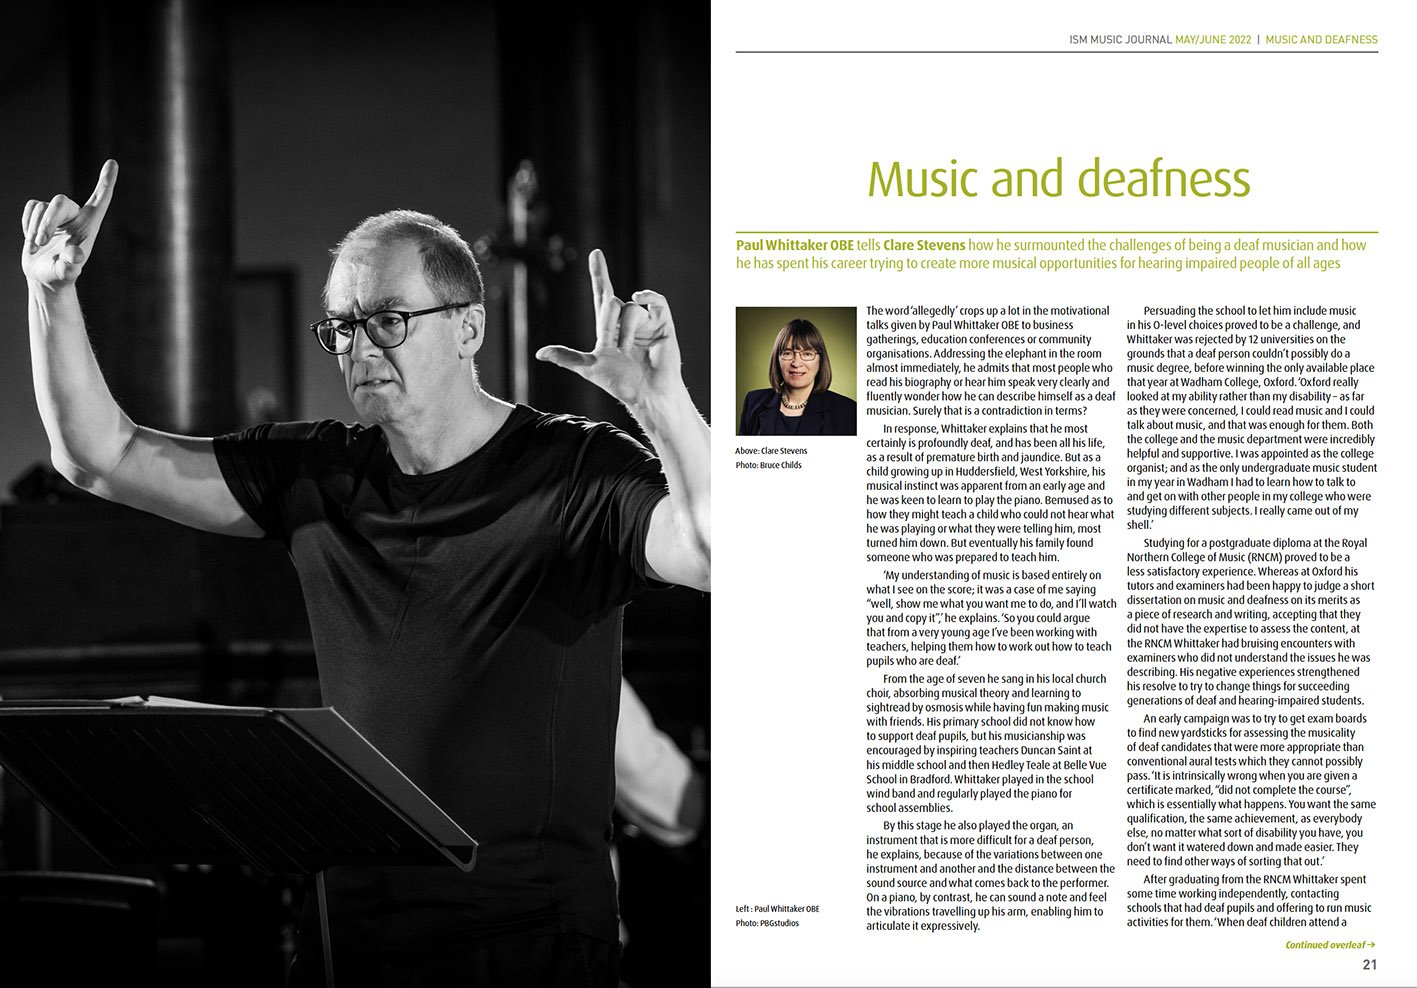 Paul Whittaker MBE -editorial ISM Music Journal